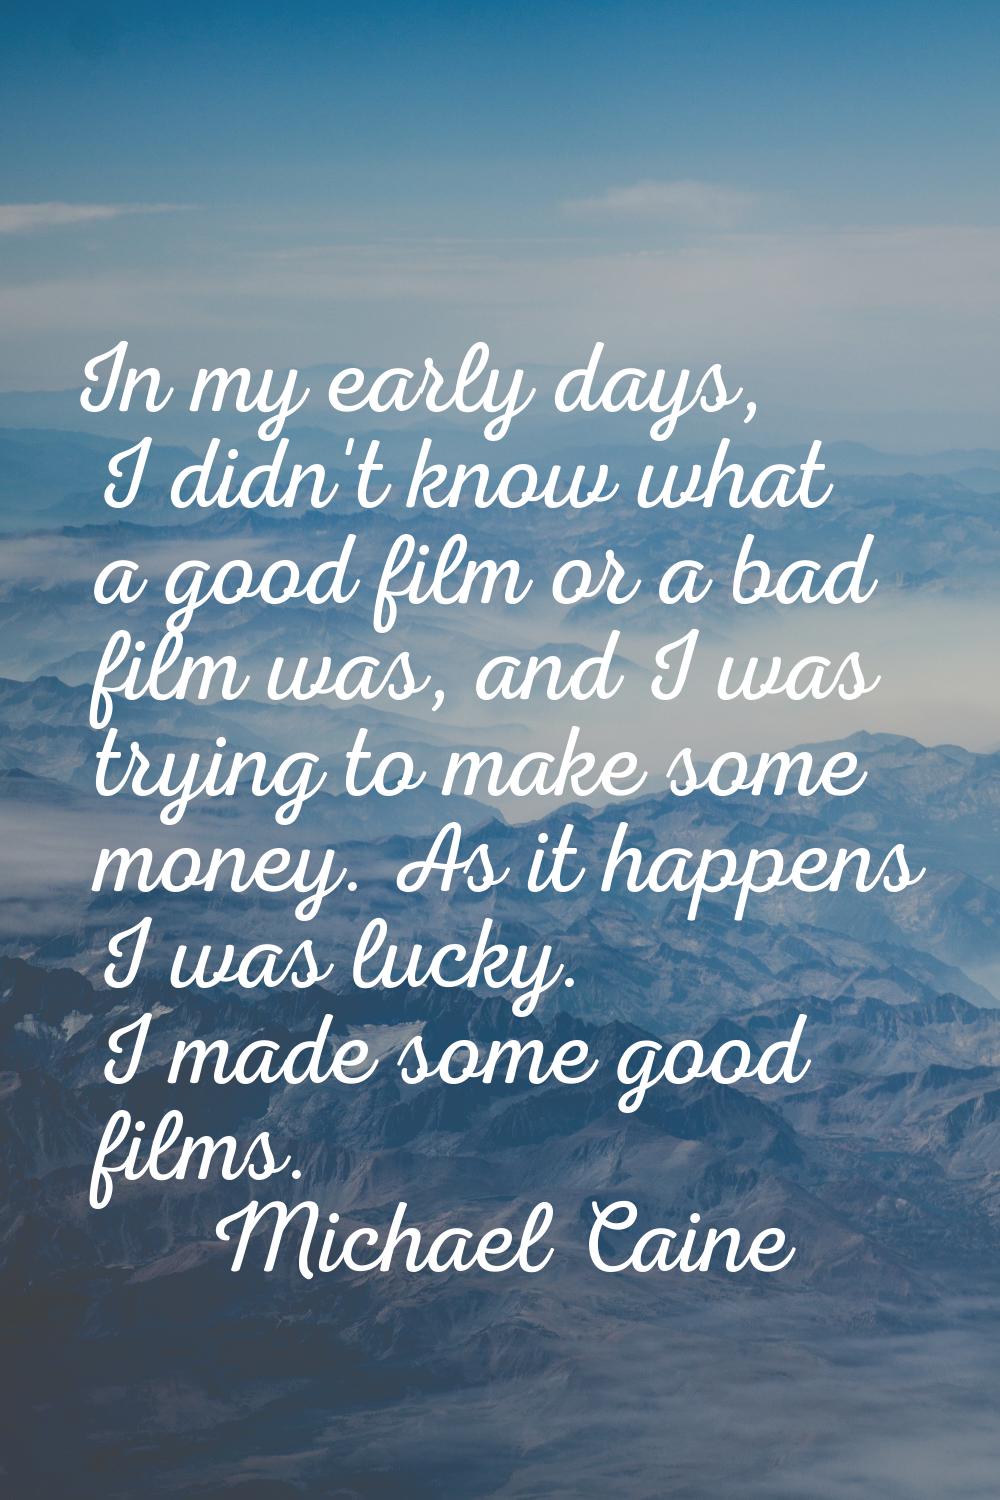 In my early days, I didn't know what a good film or a bad film was, and I was trying to make some m